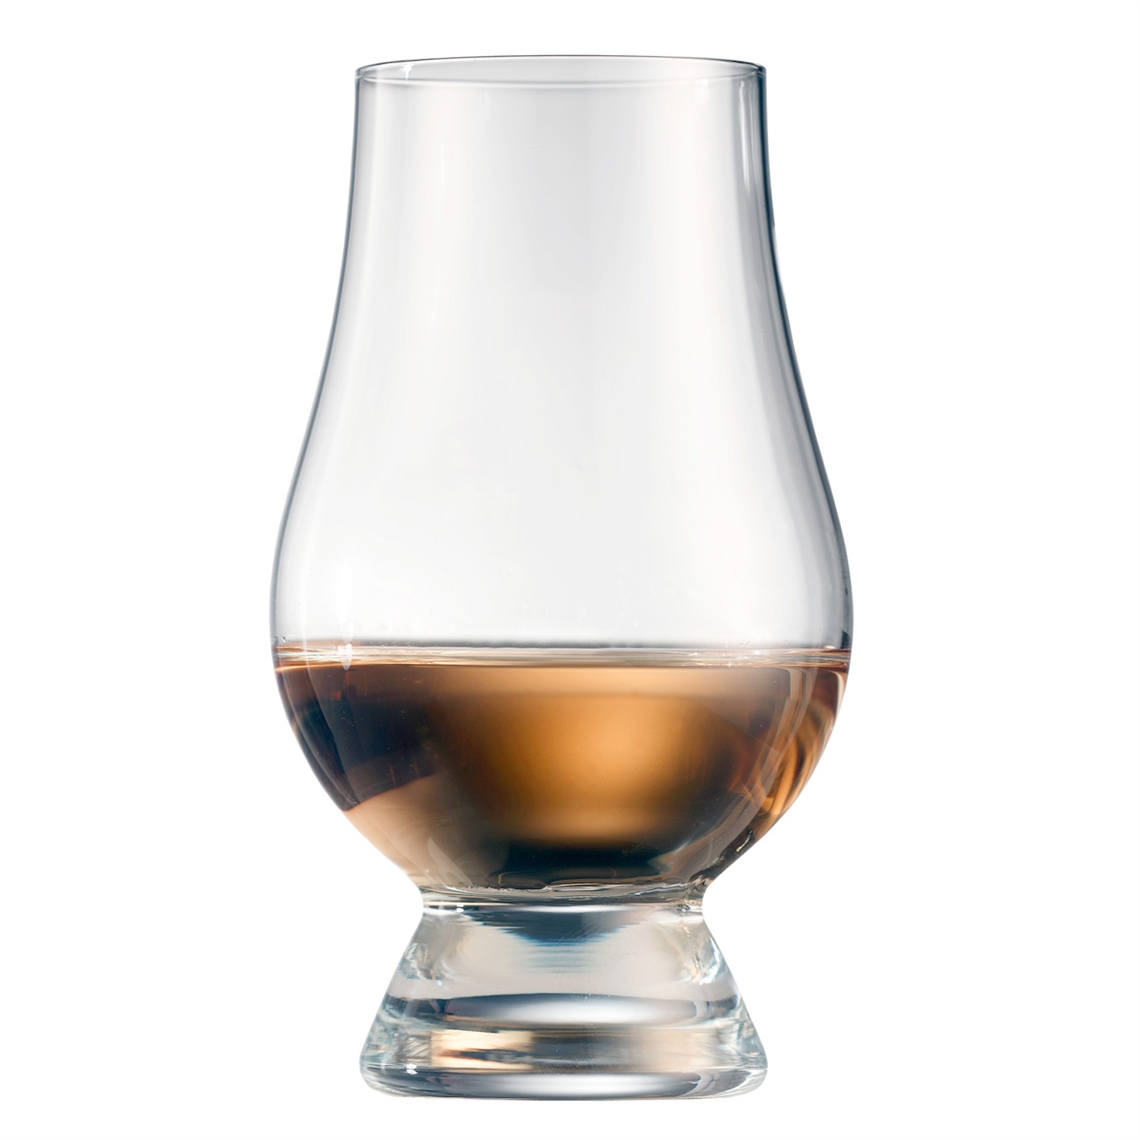 View more restaurant glasses - schott zwiesel from our Whisky Glasses range